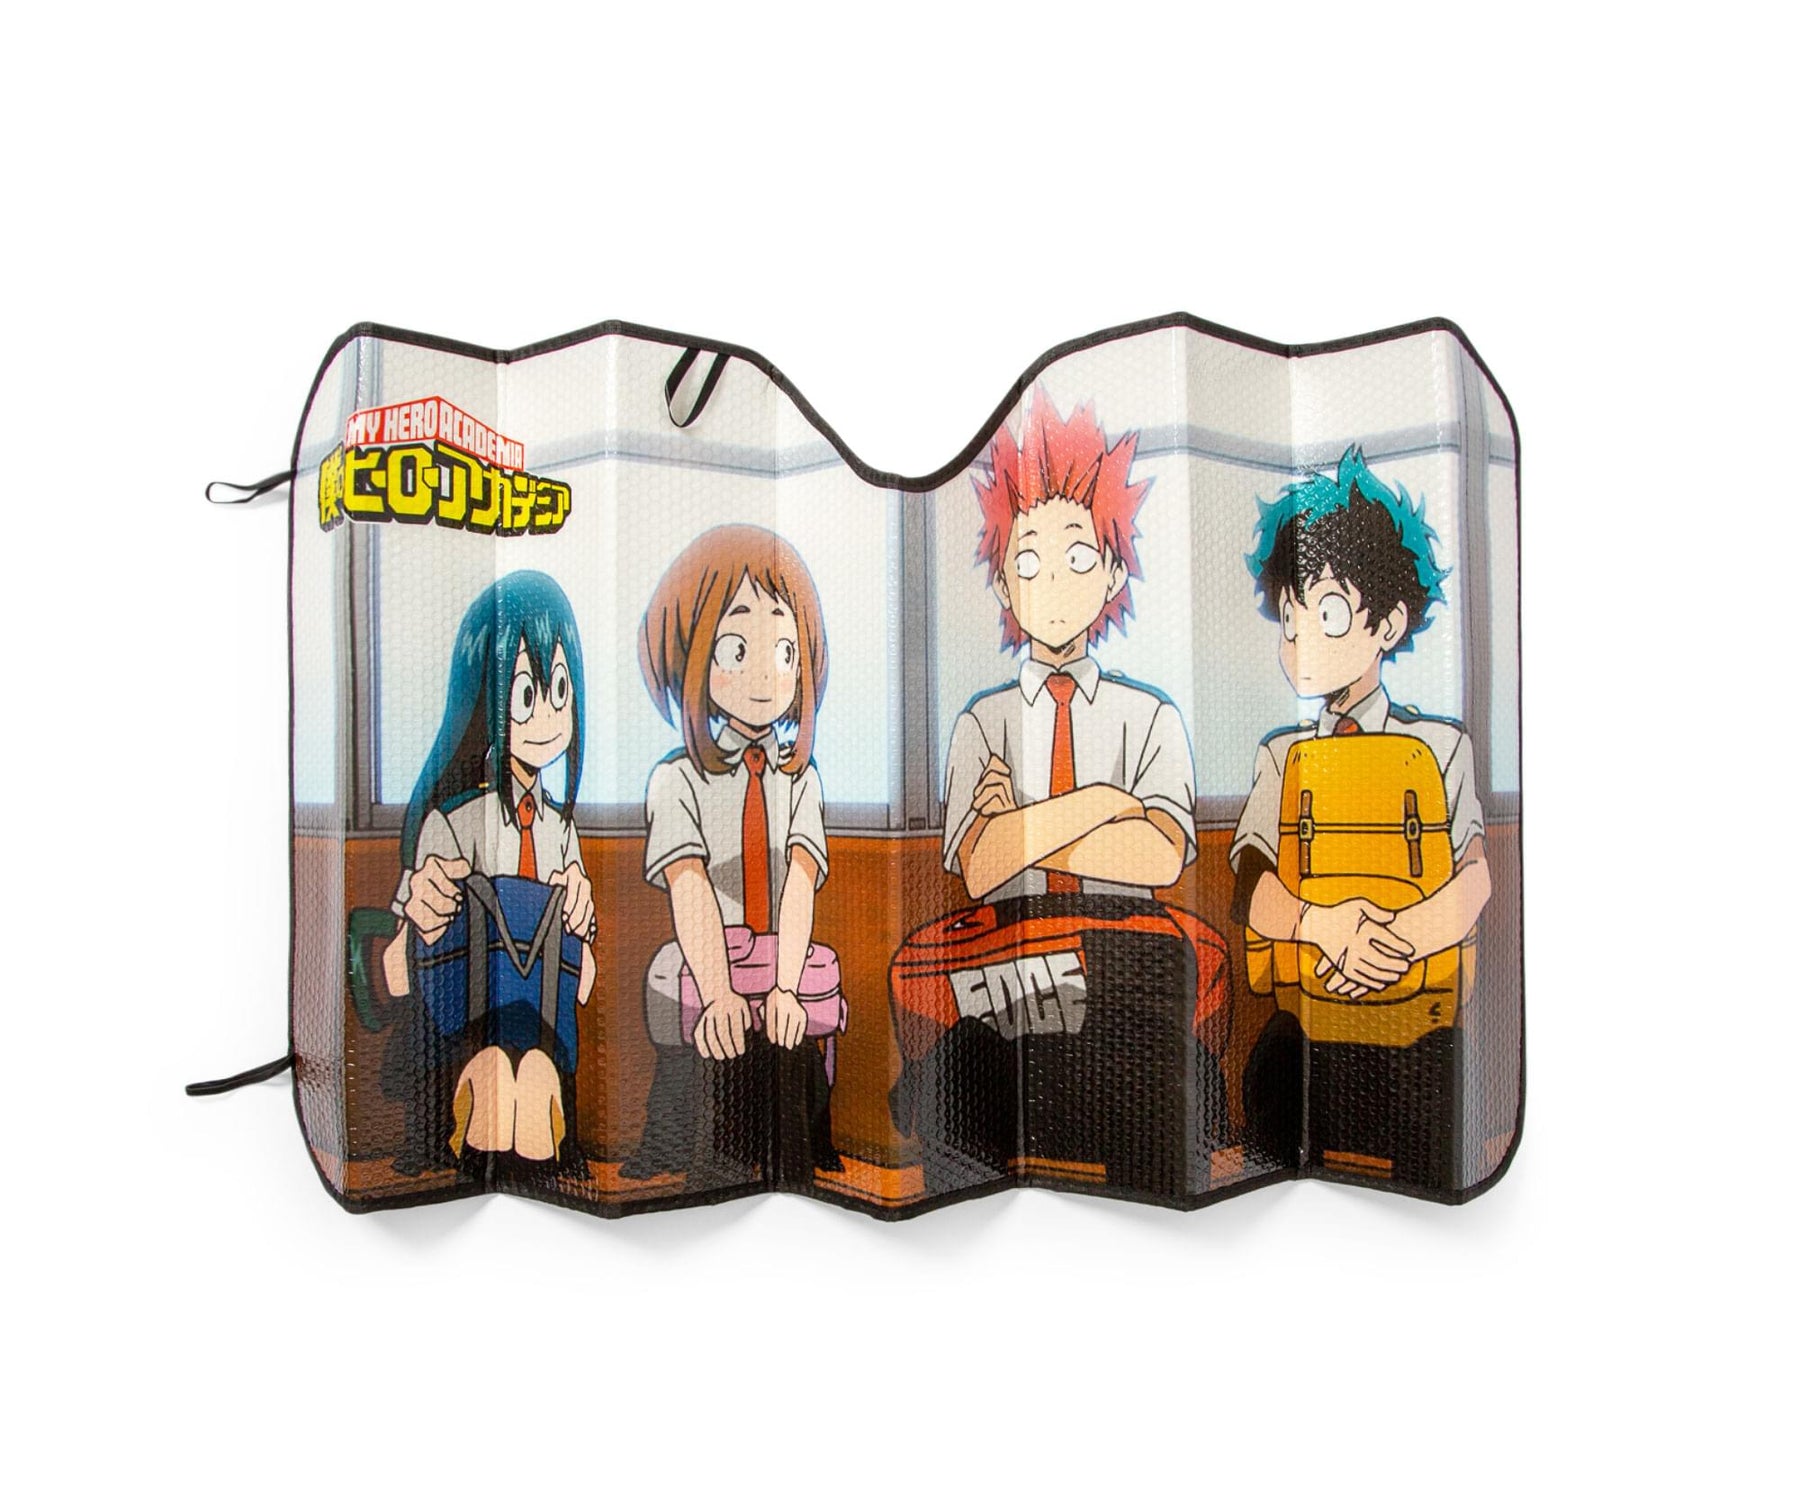 My Hero Academia Characters Sunshade for Car Windshield | 58 x 28 Inches